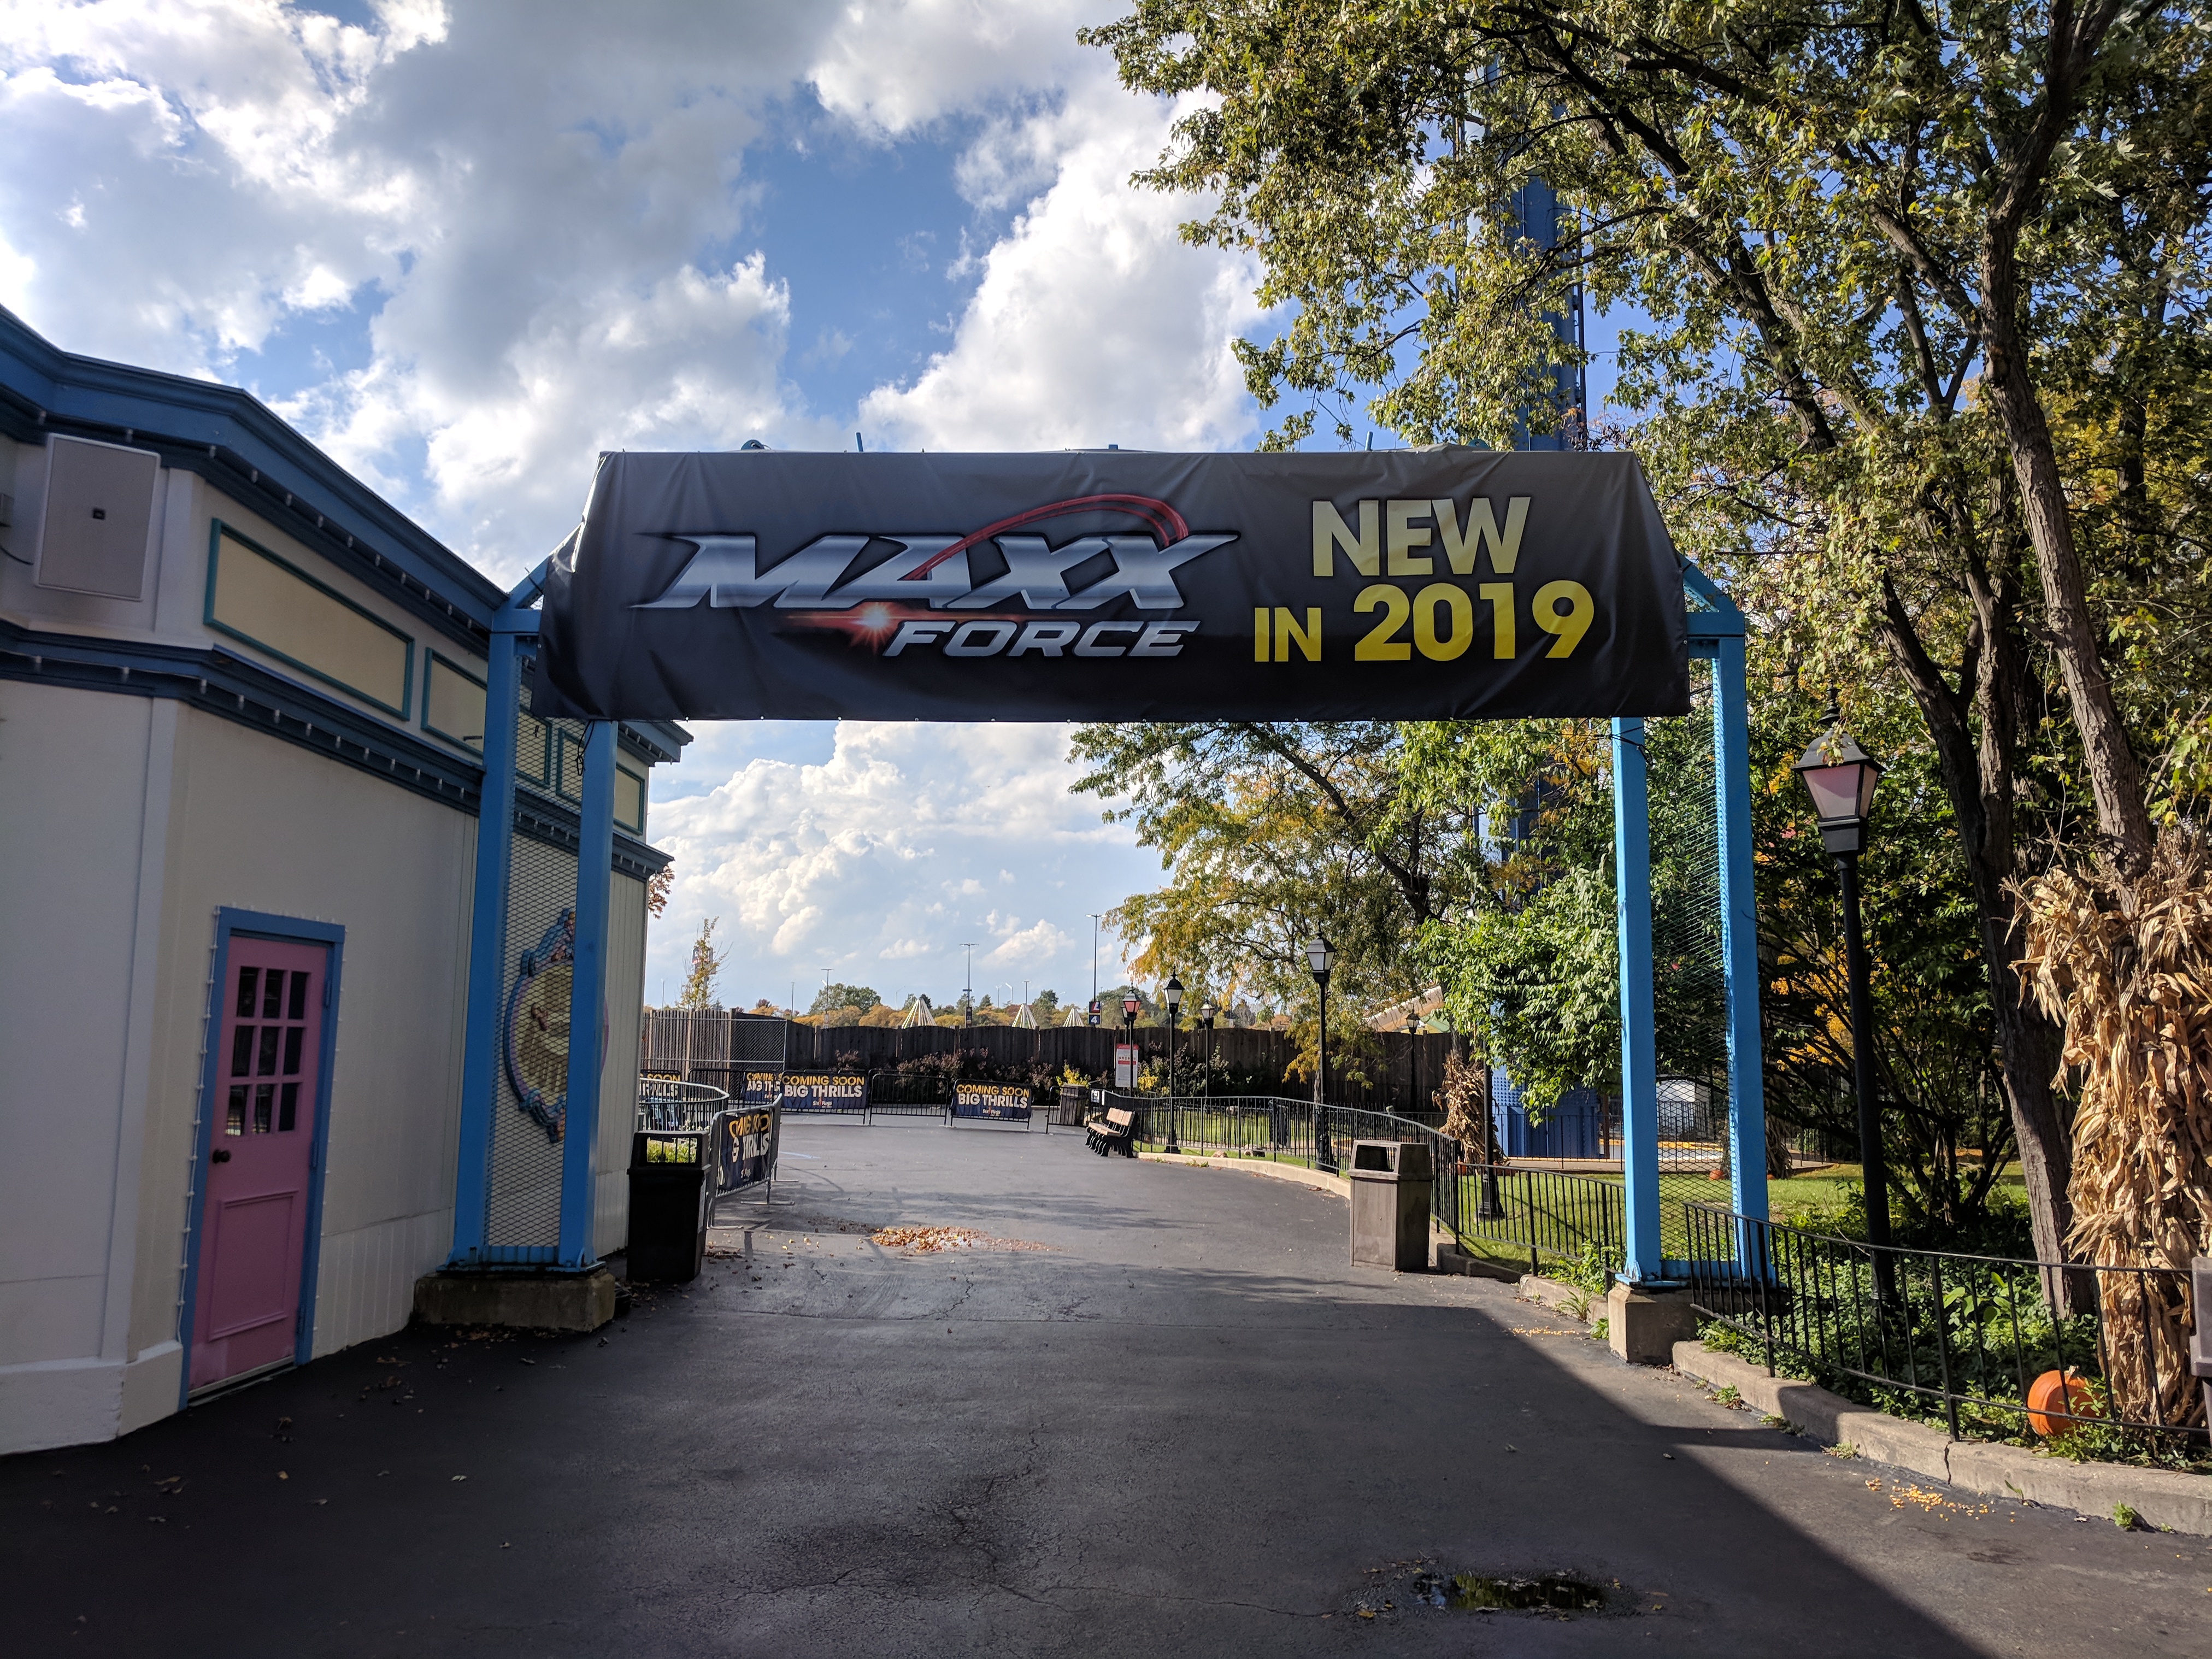 New Coaster Planned for Six Flags Great America in 2019